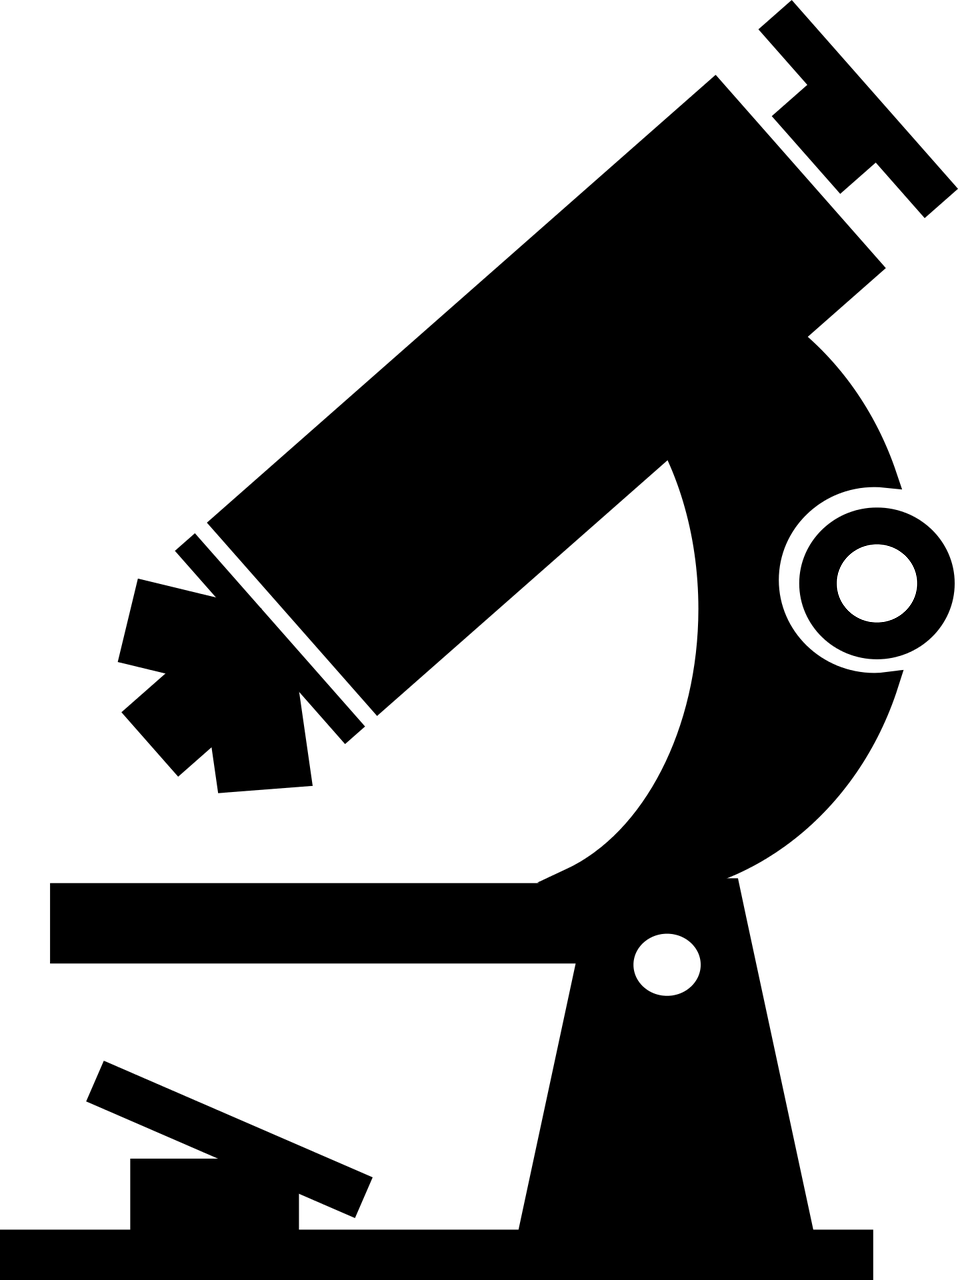 a man holding a tennis racquet on top of a tennis court, an album cover, by Android Jones, generative art, white on black, moon in the night sky, ios app icon, dots